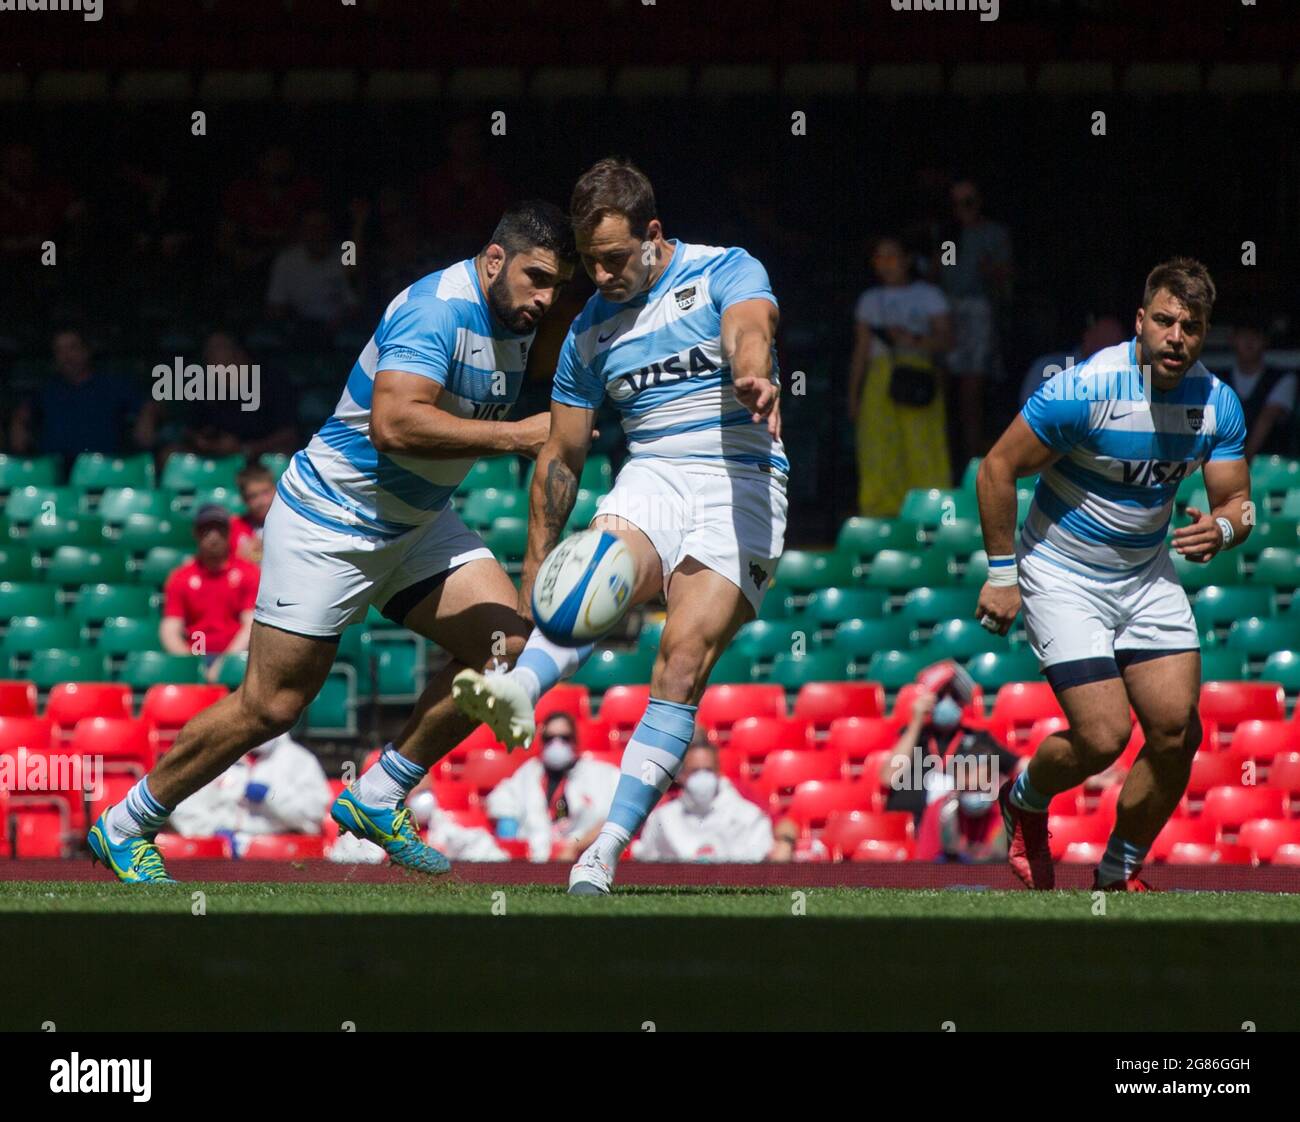 Cardiff, UK. 17th July, 2021. Cardiff, UK. July 17th : Nicolas Sanchez (Argentina) controls the ball during the 2021 Summer Internationals match between Wales and Argentina at Principality Stadium. Credit: Federico Guerra Morán/Alamy Live News Stock Photo